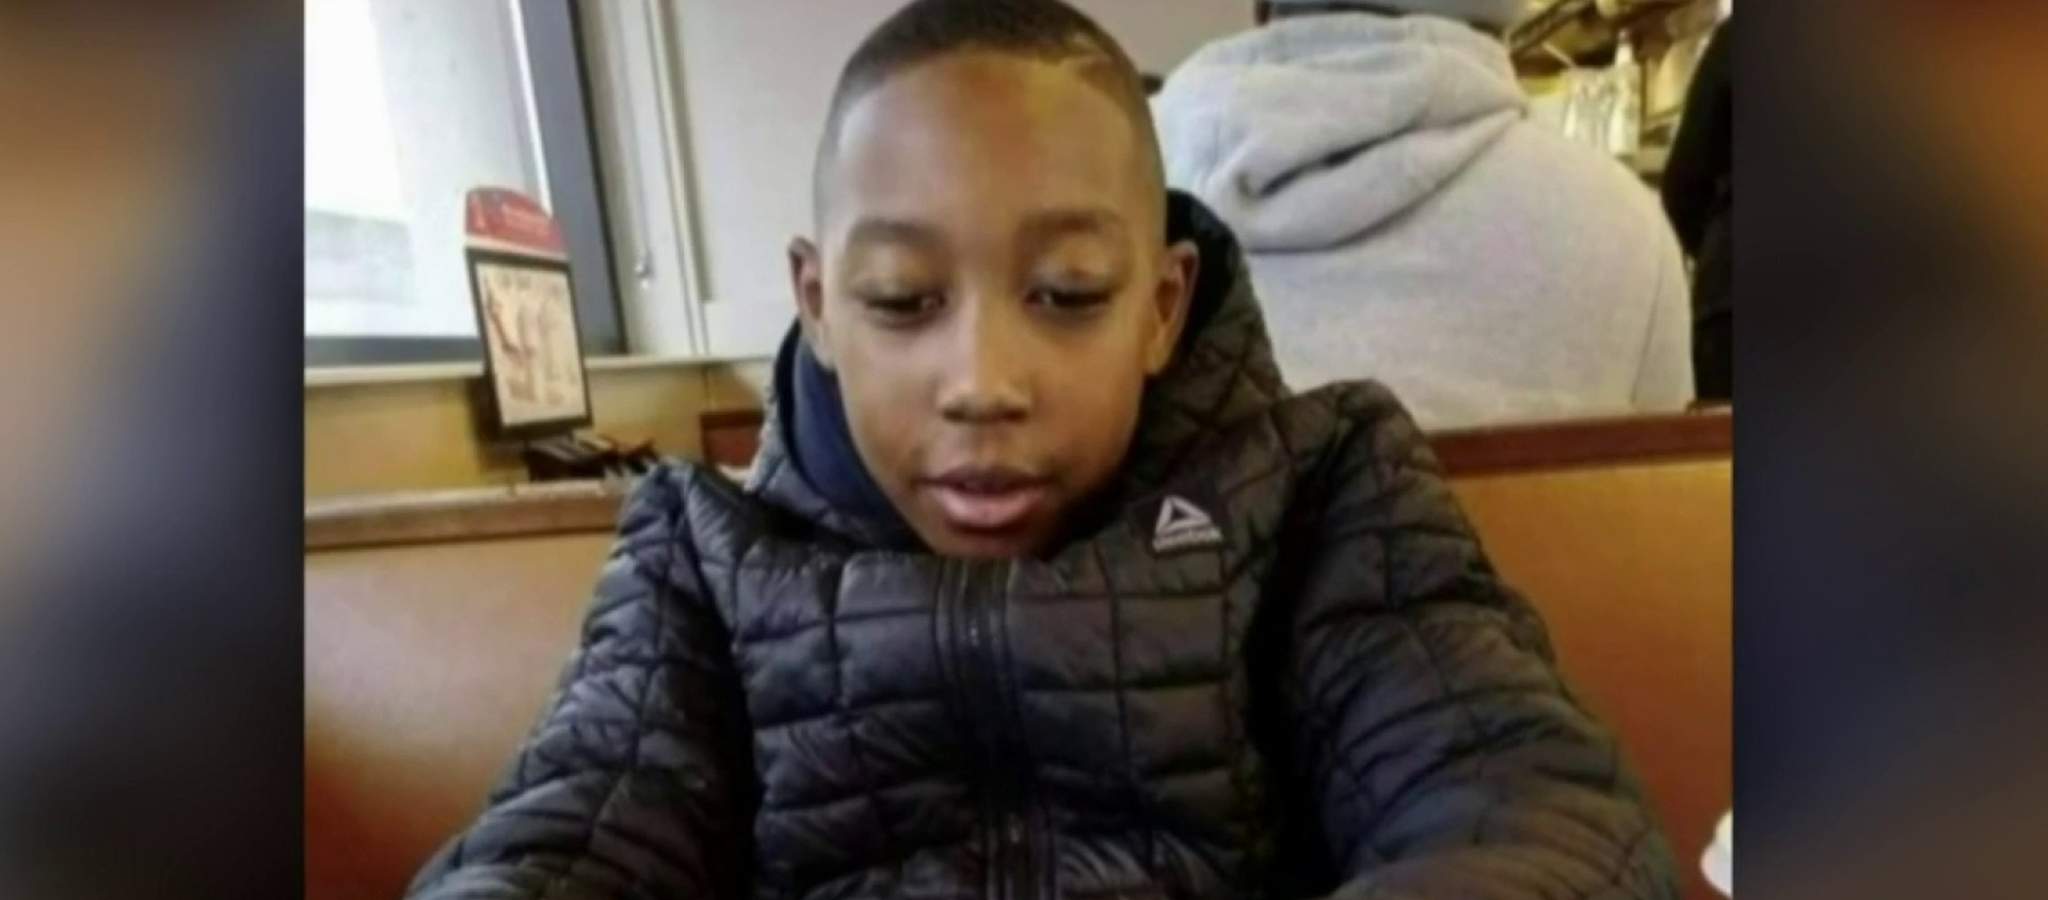 9-year-old boy killed in Detroit by car driving wrong direction on one-way street